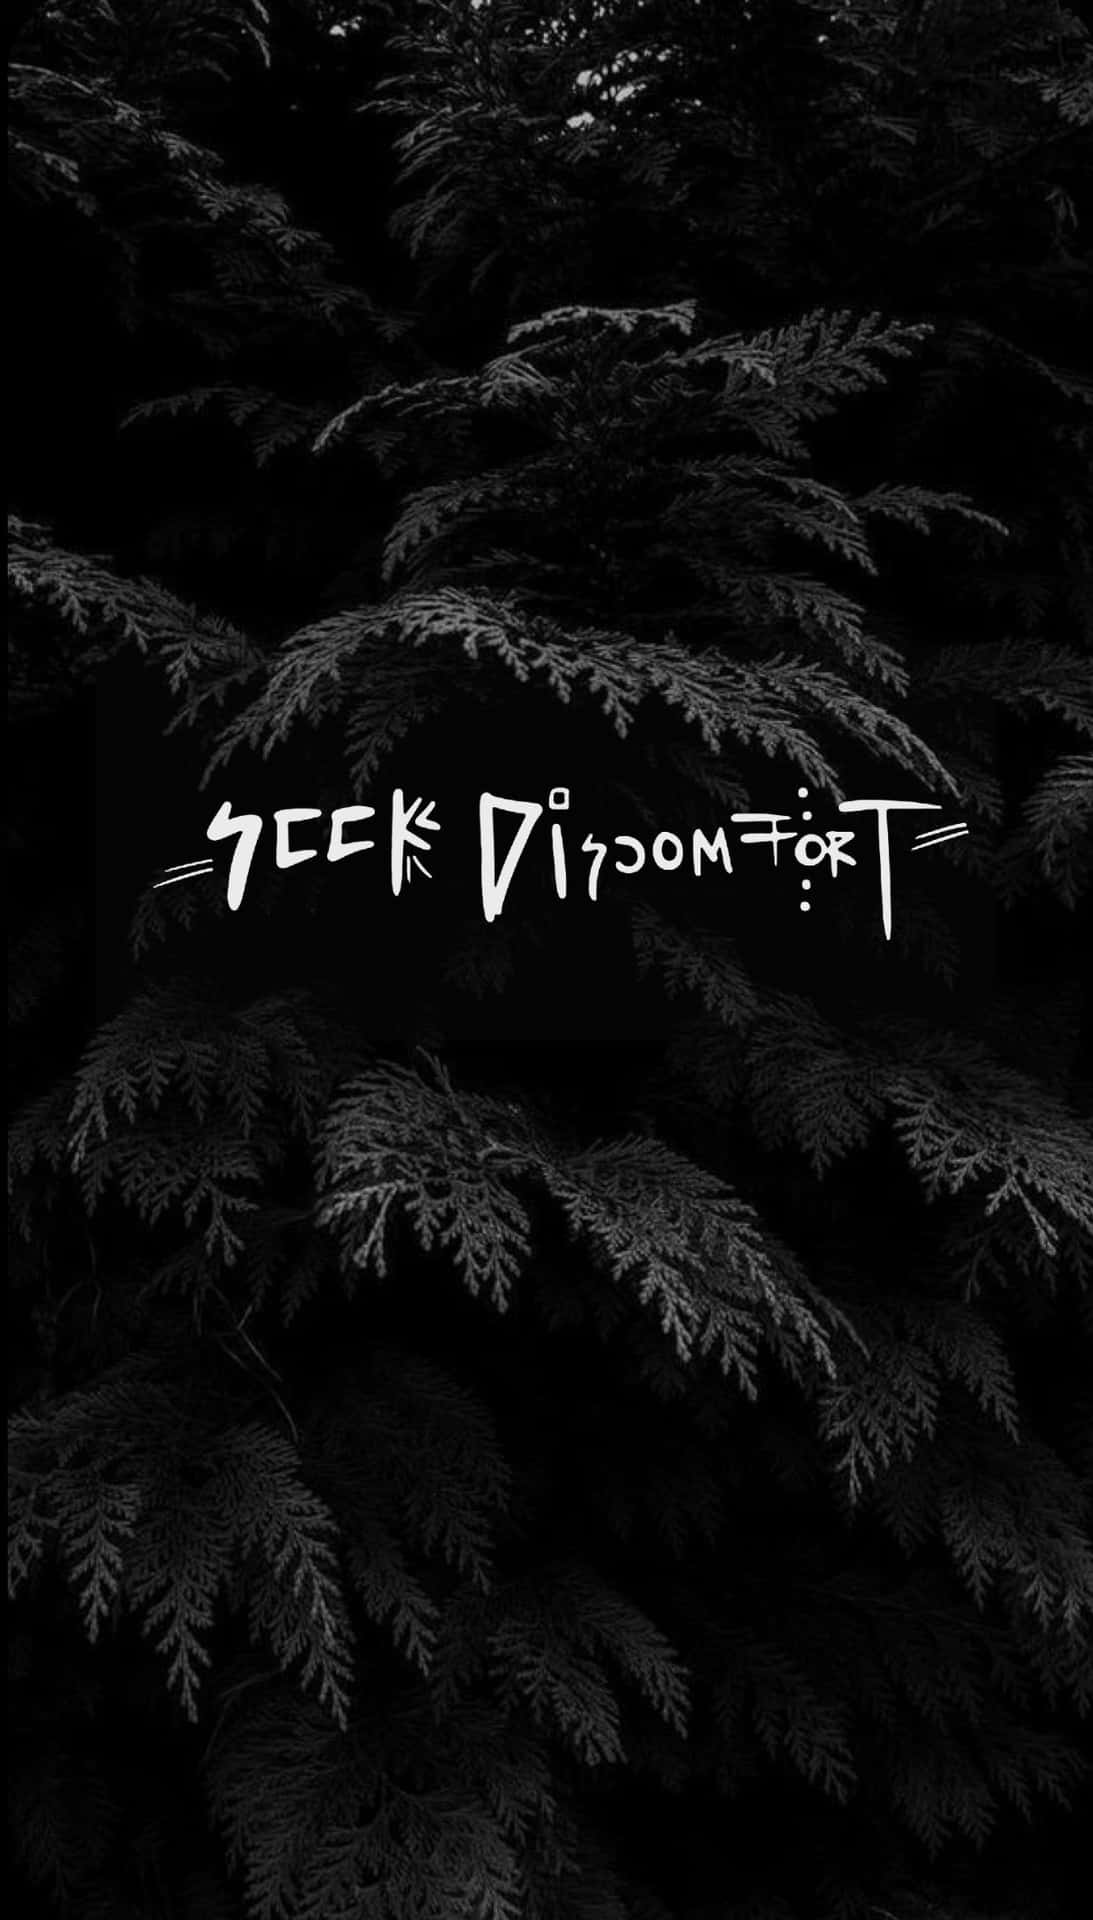 A Black And White Image Of A Tree With The Words'seek Discord' Wallpaper